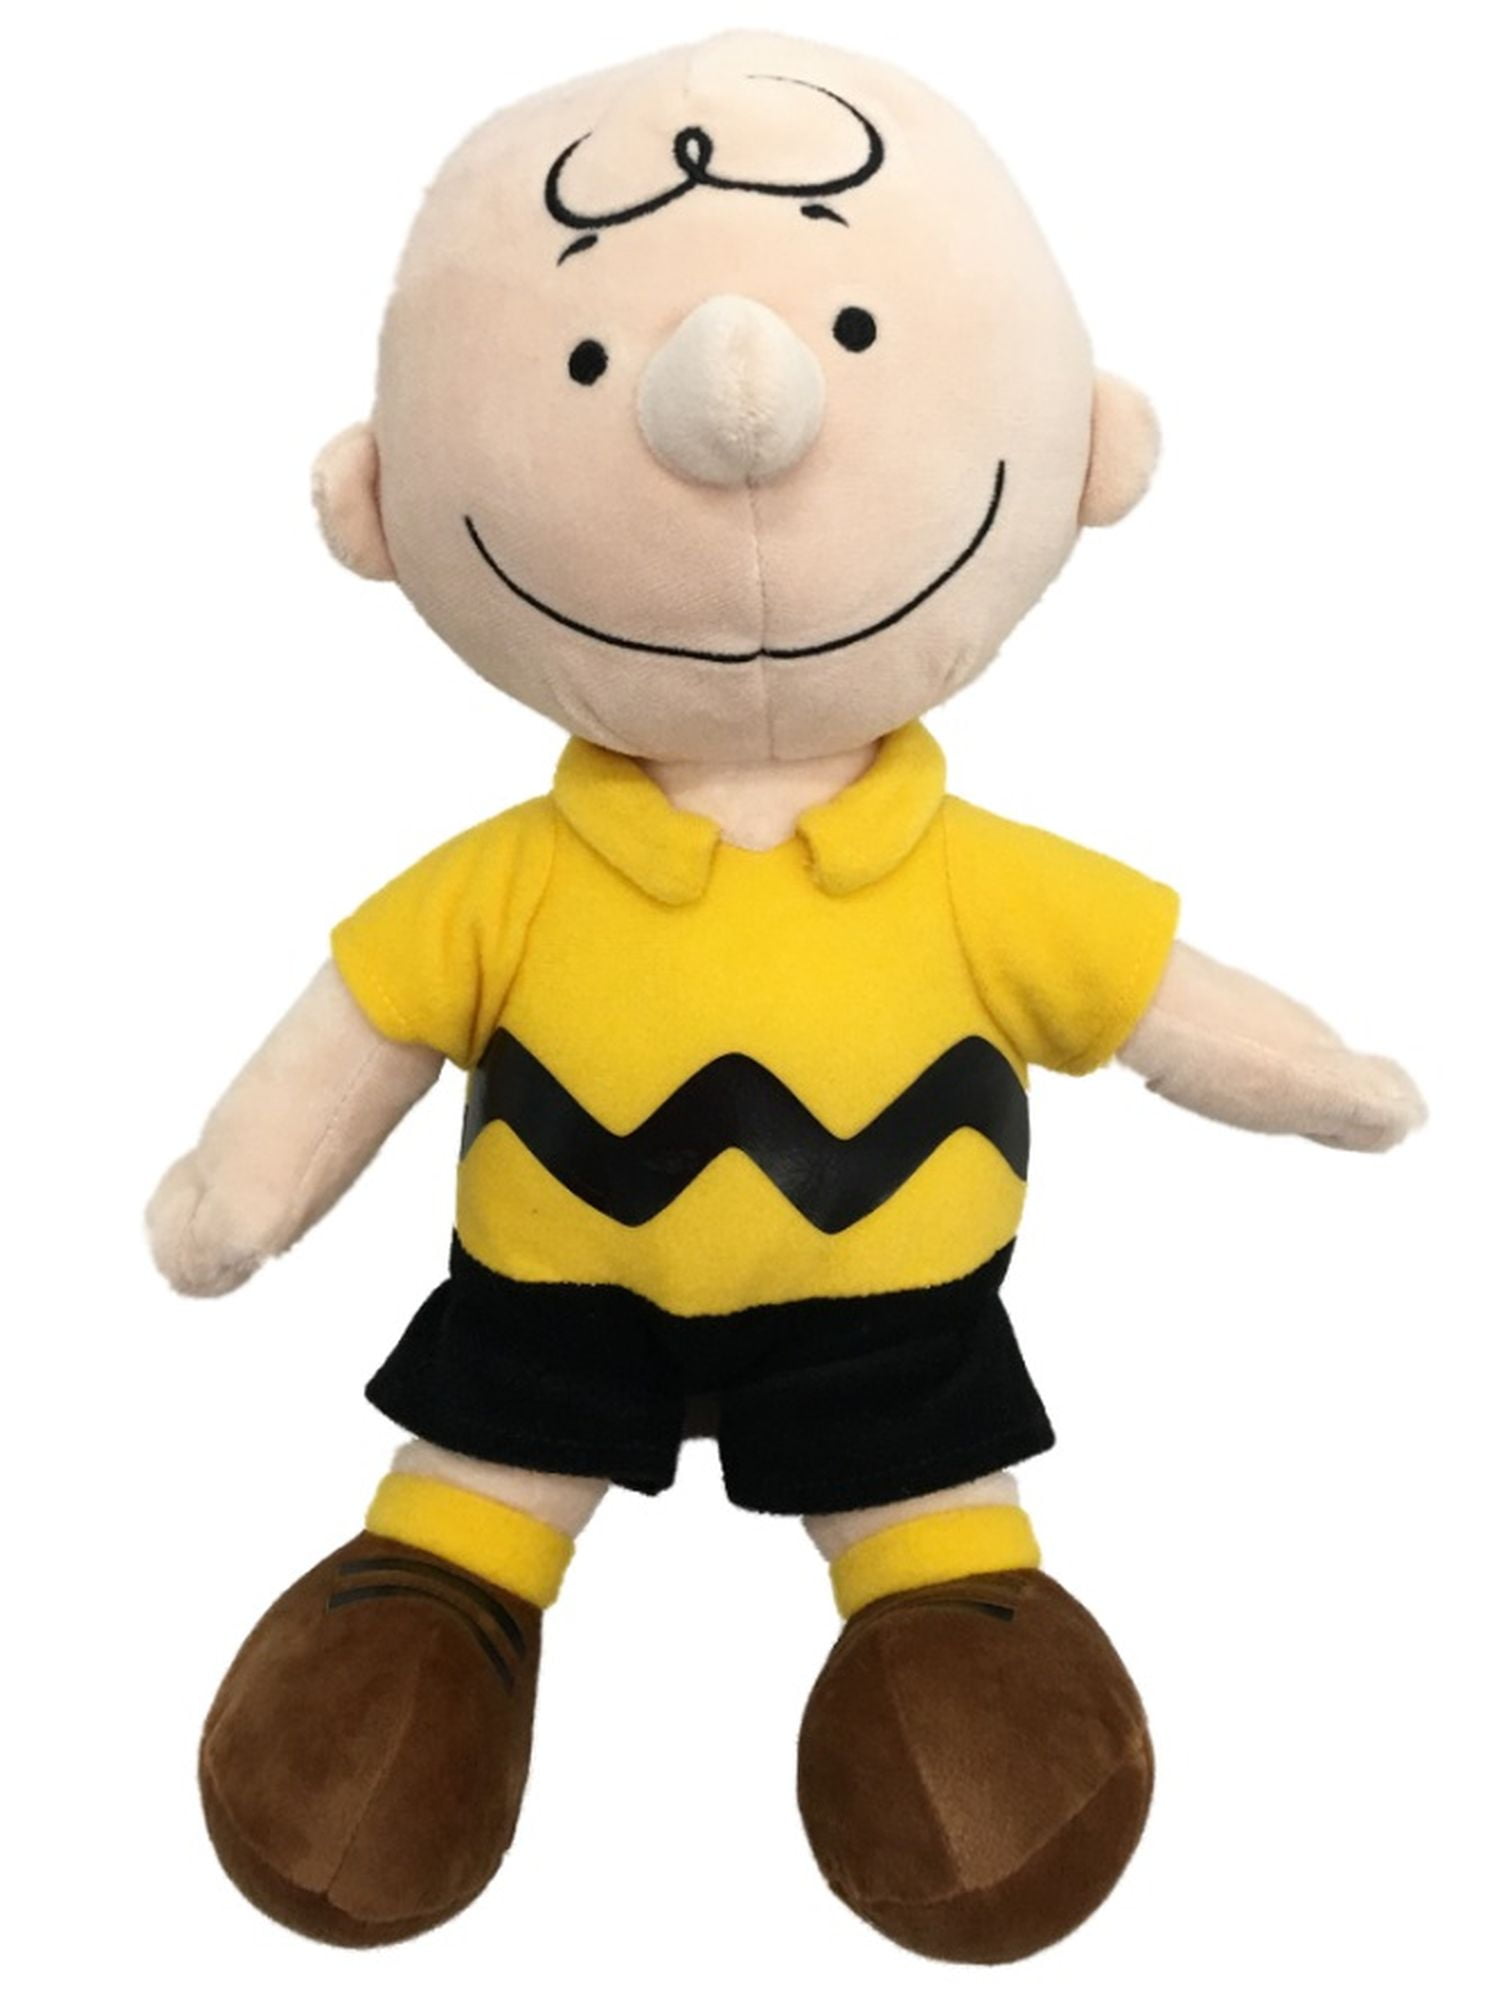 Kohl's Cares Peanuts Lucy Doll Plush Toy Stuffed 14" Tall Charlie Brown 2019 for sale online 